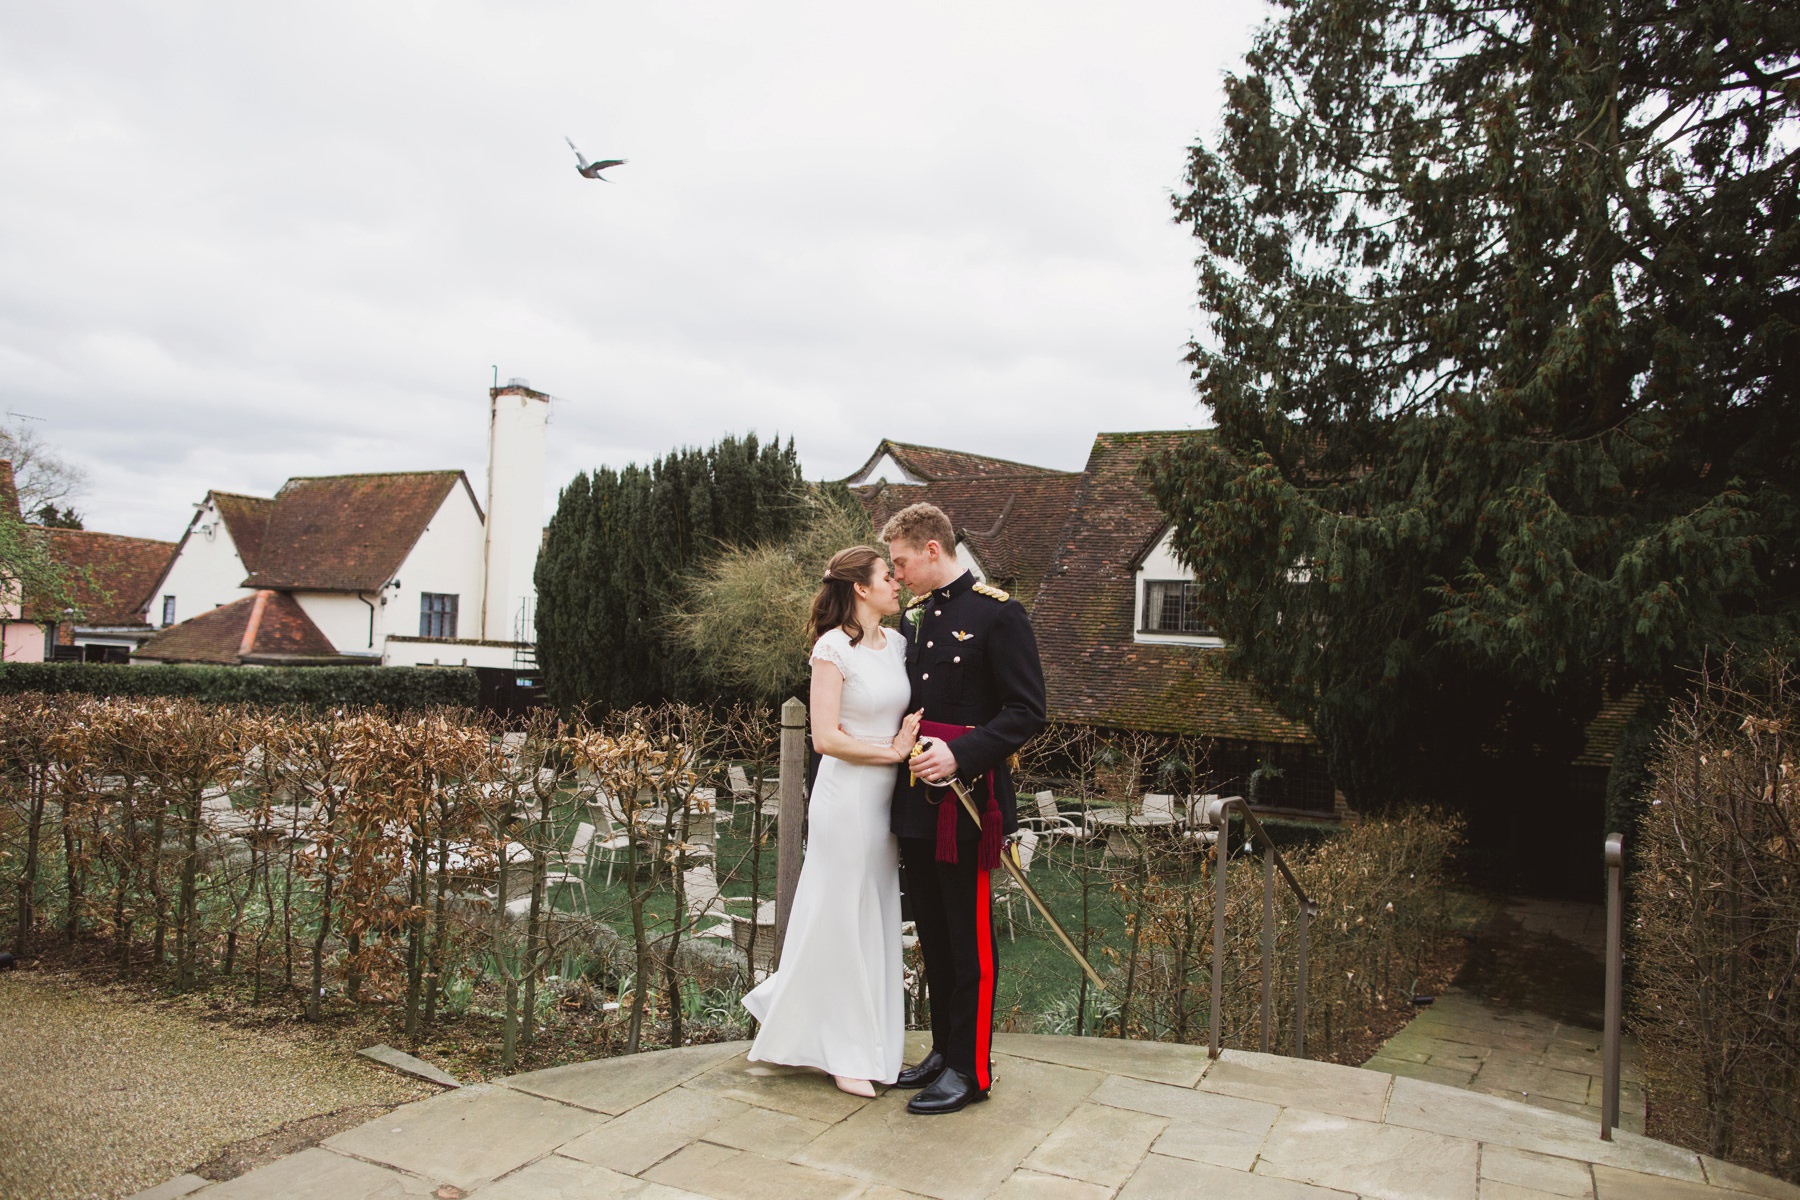 A winter wedding at the swan in Lavenham